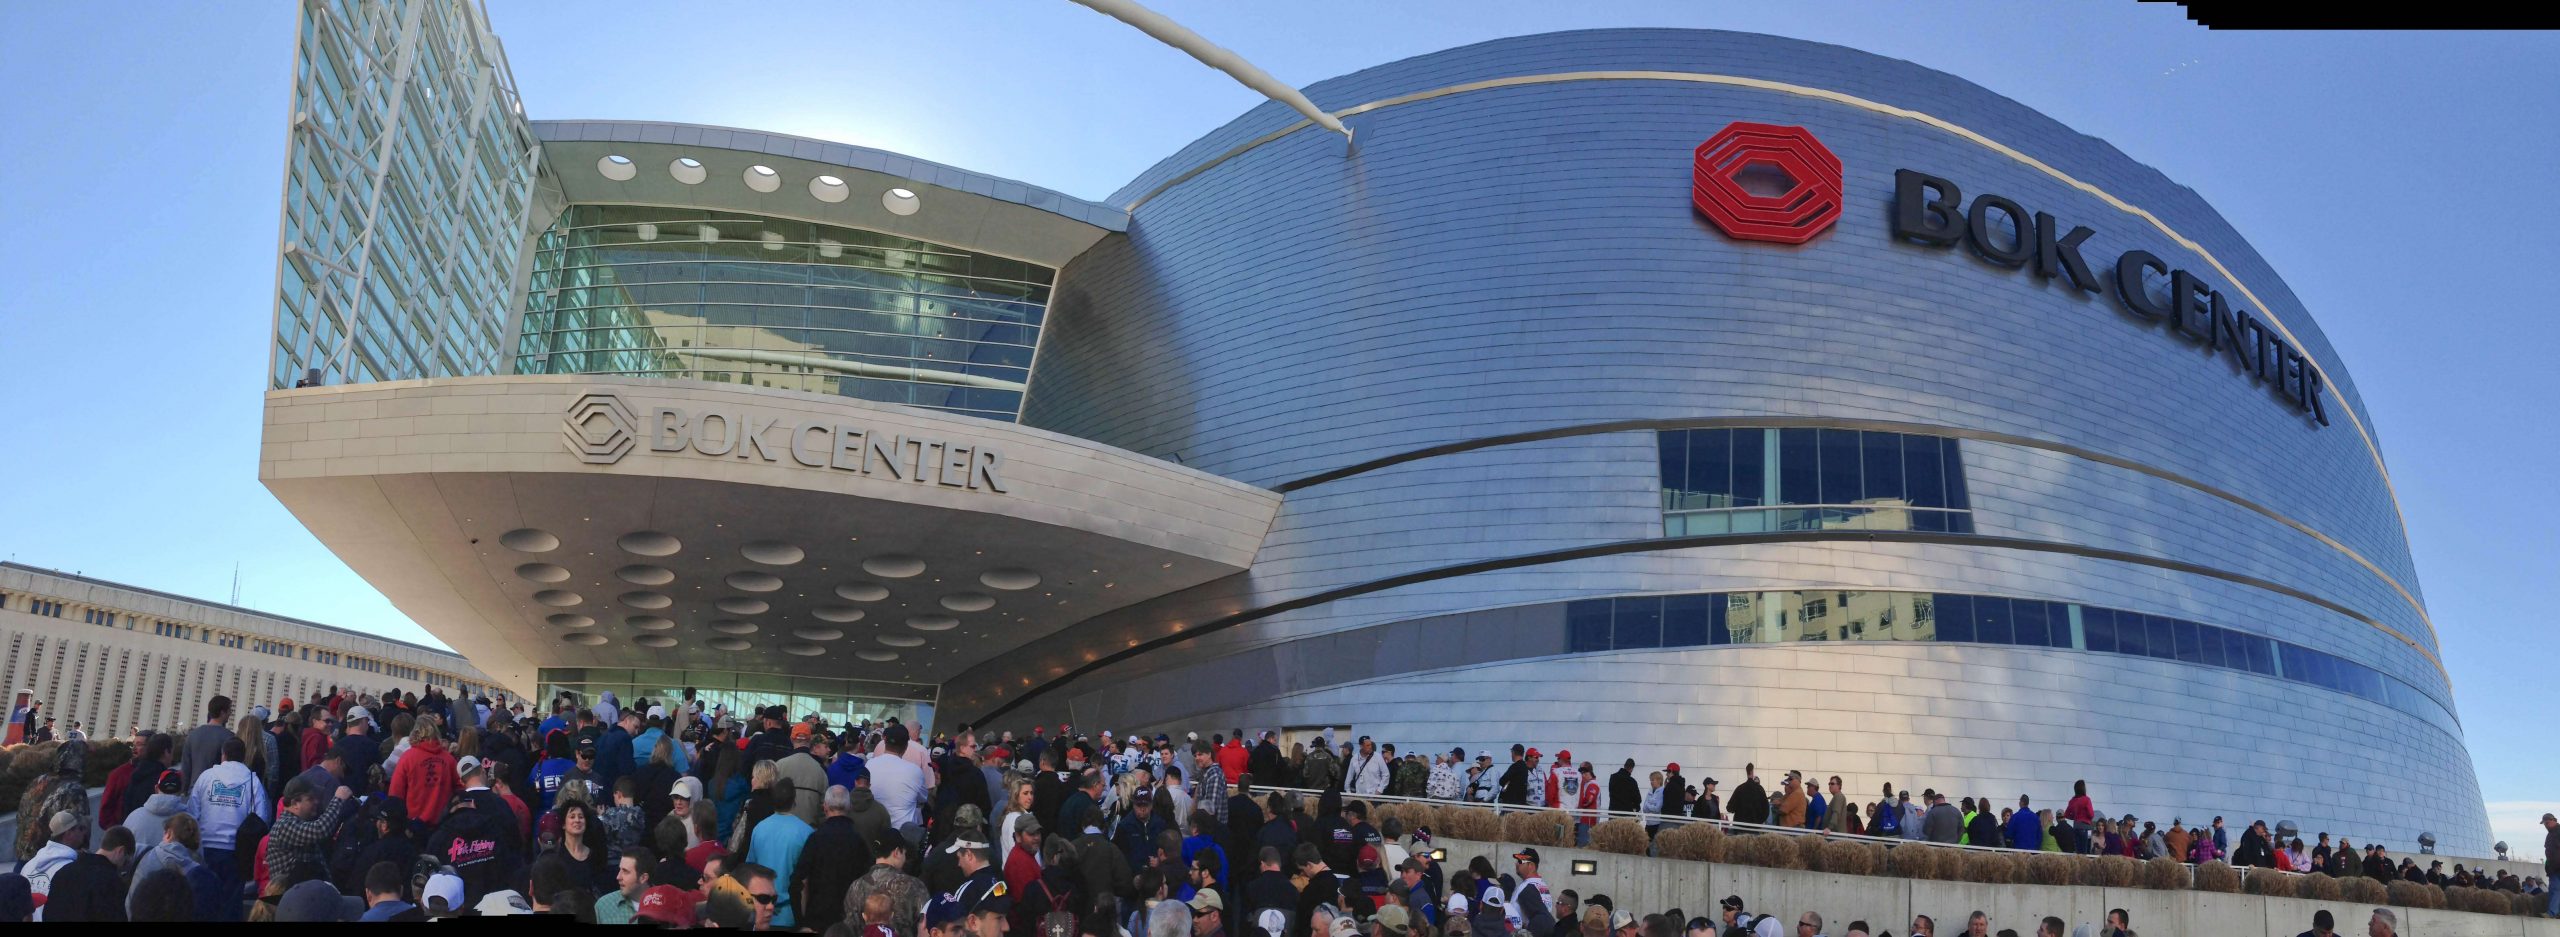 The BOK Center is a wonderful venue for the Classic.